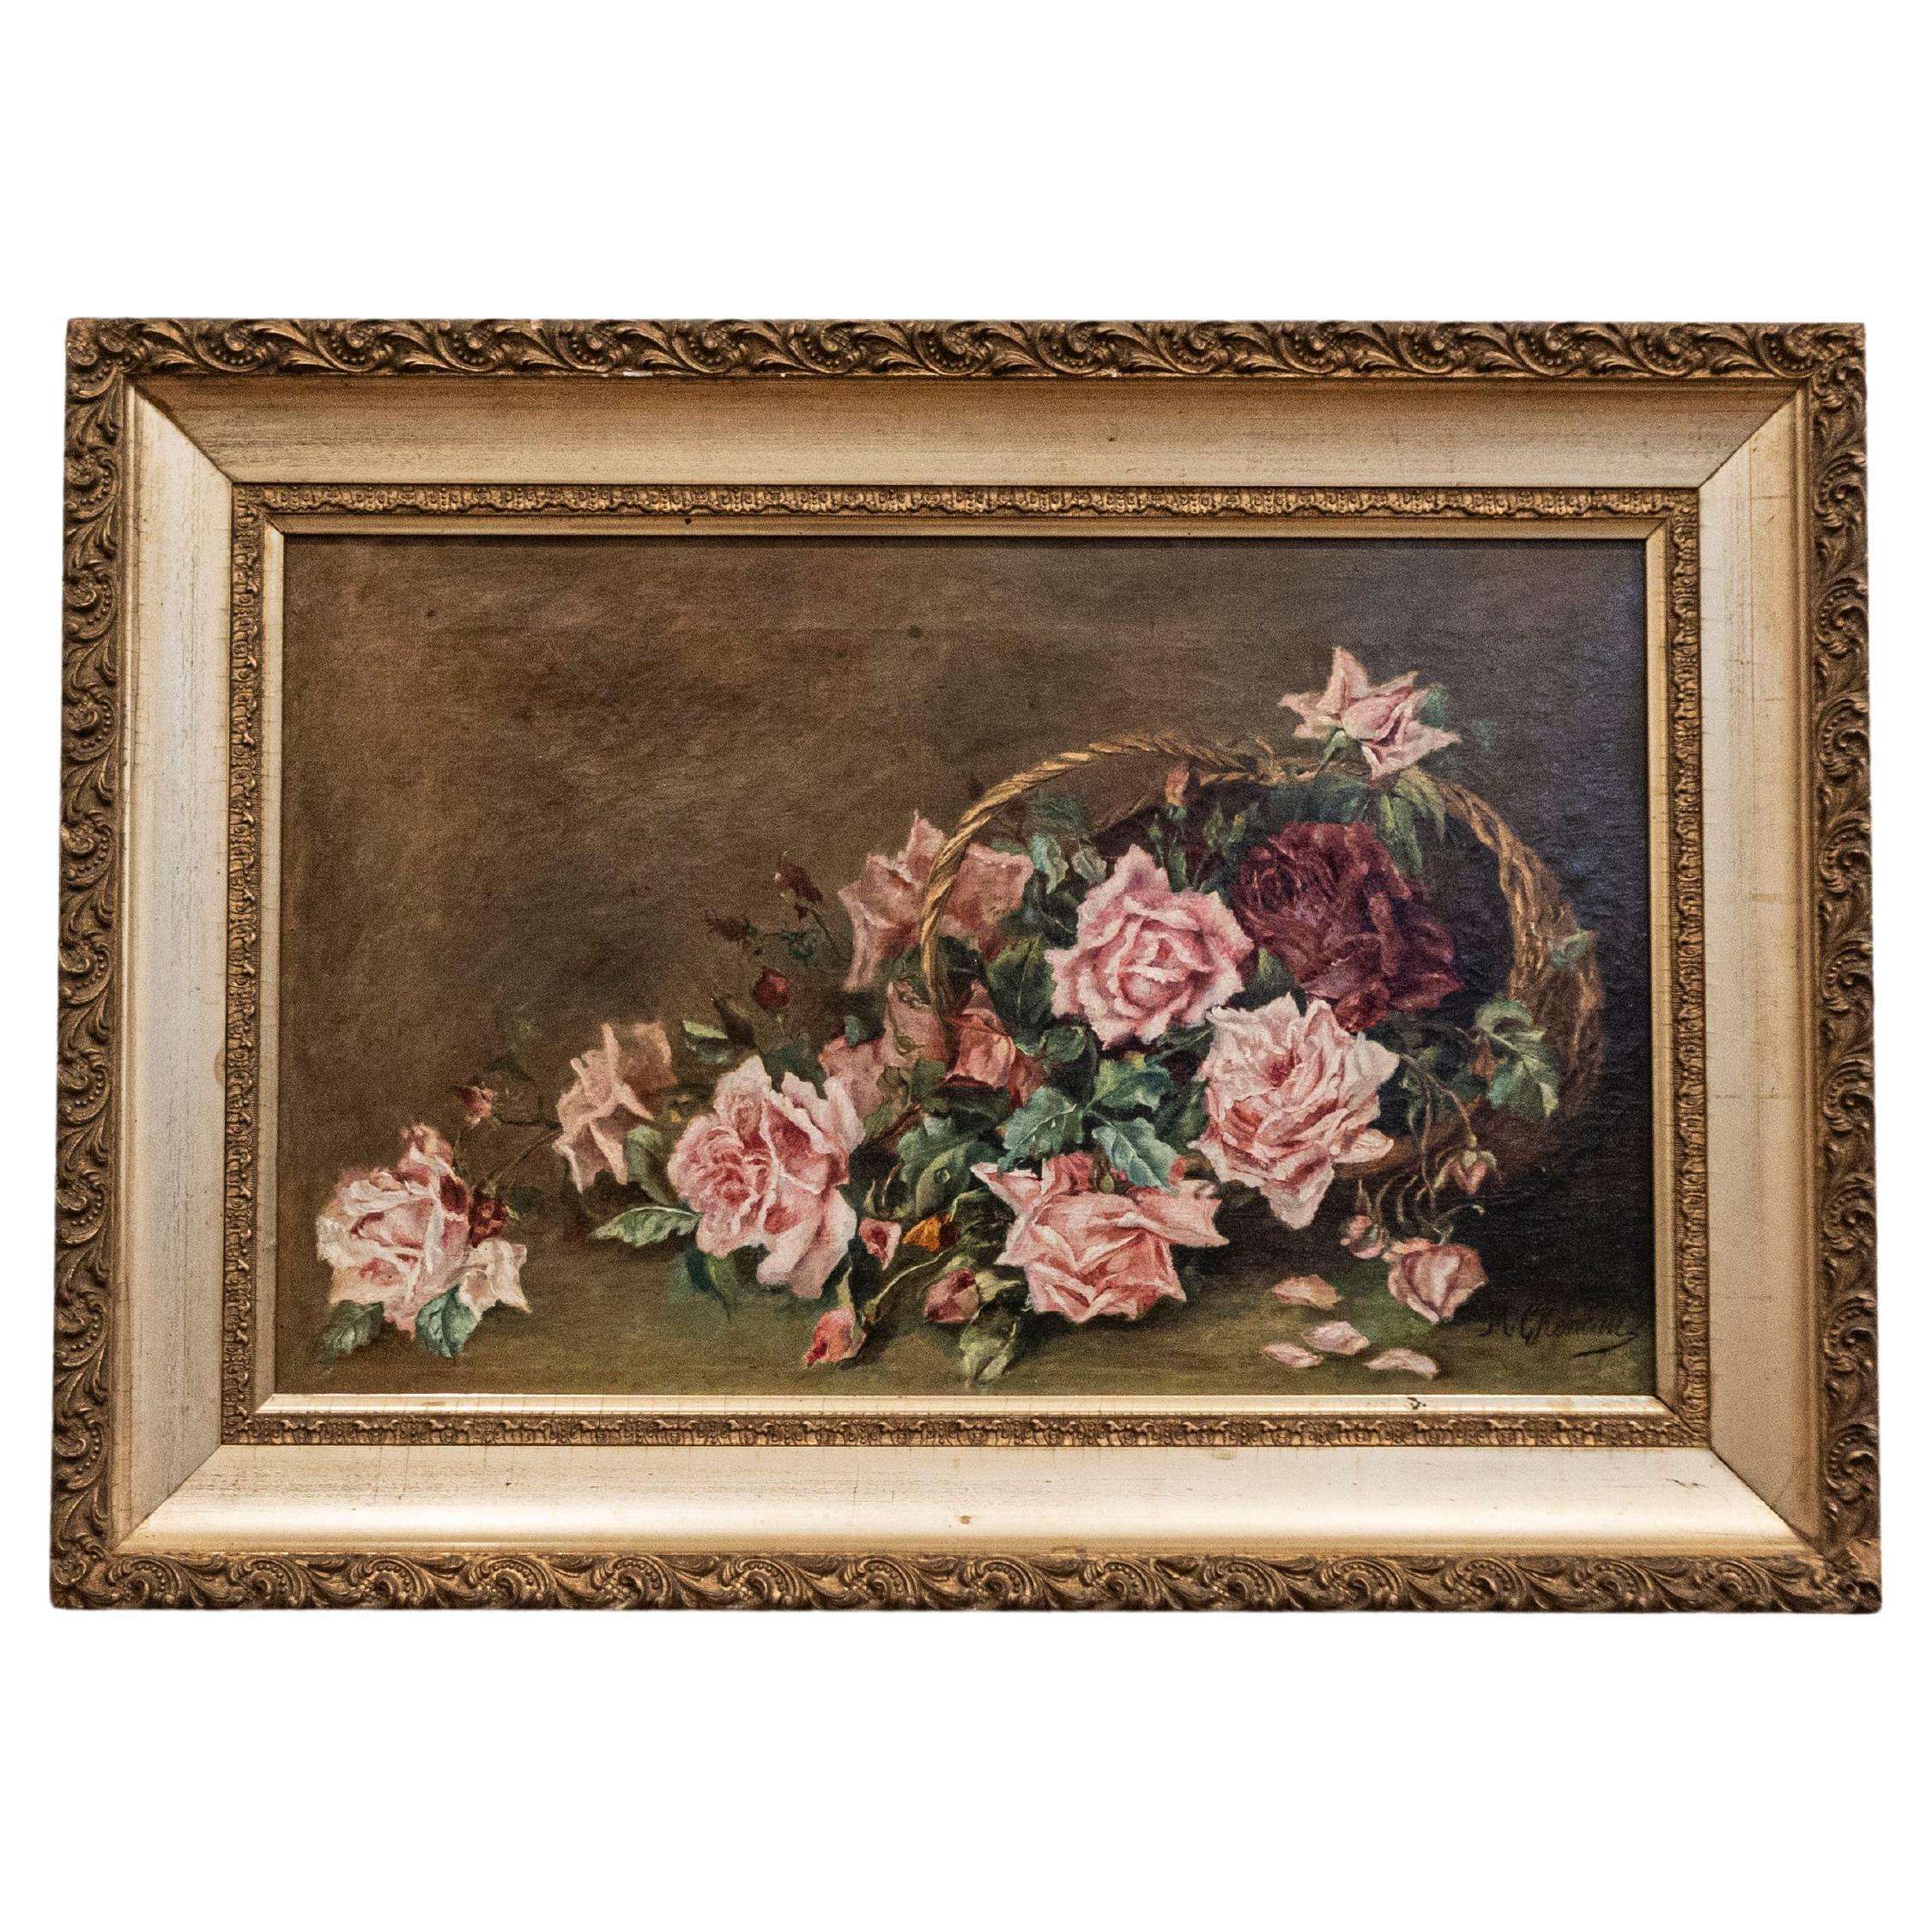 French 19th Century Framed Floral Oil on Canvas Painting Depicting Roses For Sale